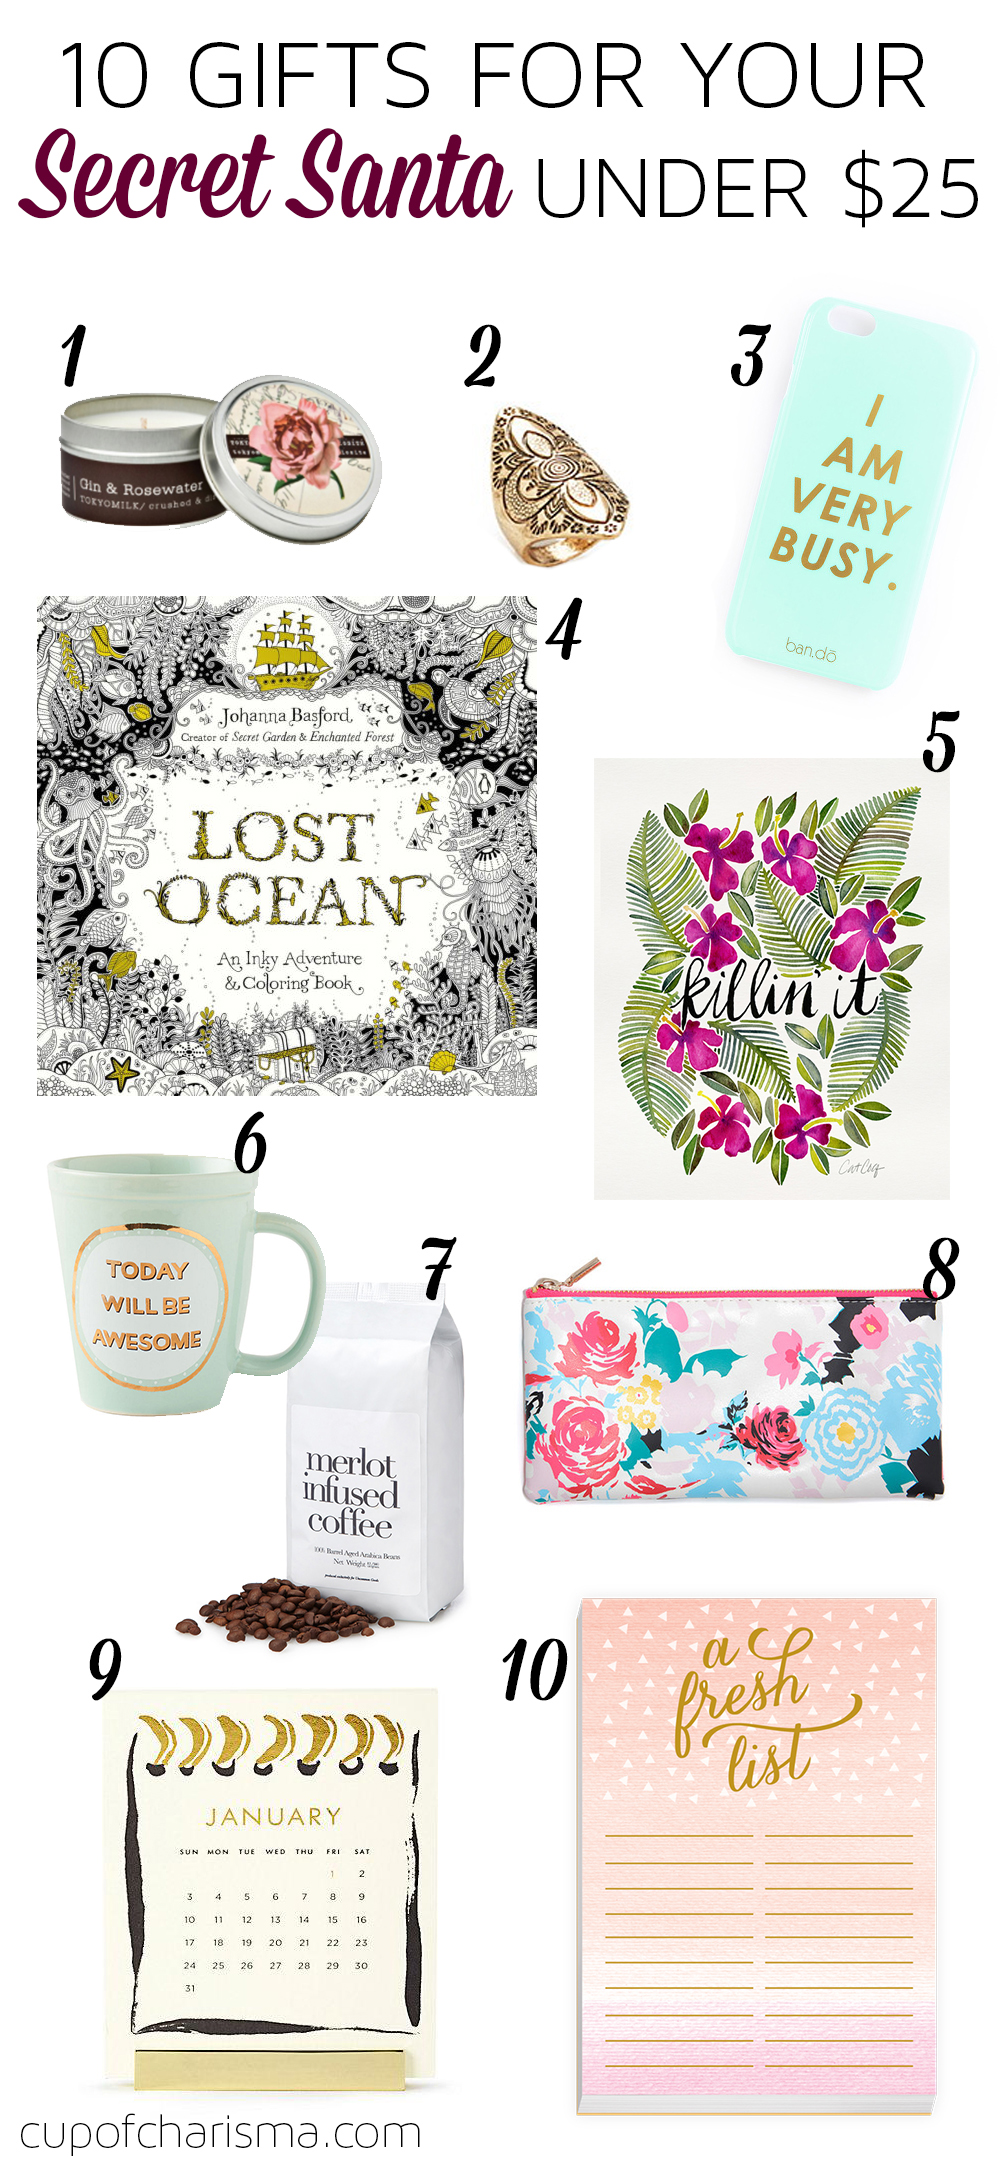 Cup of Charisma - 10 Secret Santa Gifts Under $25 - Cup of Charisma